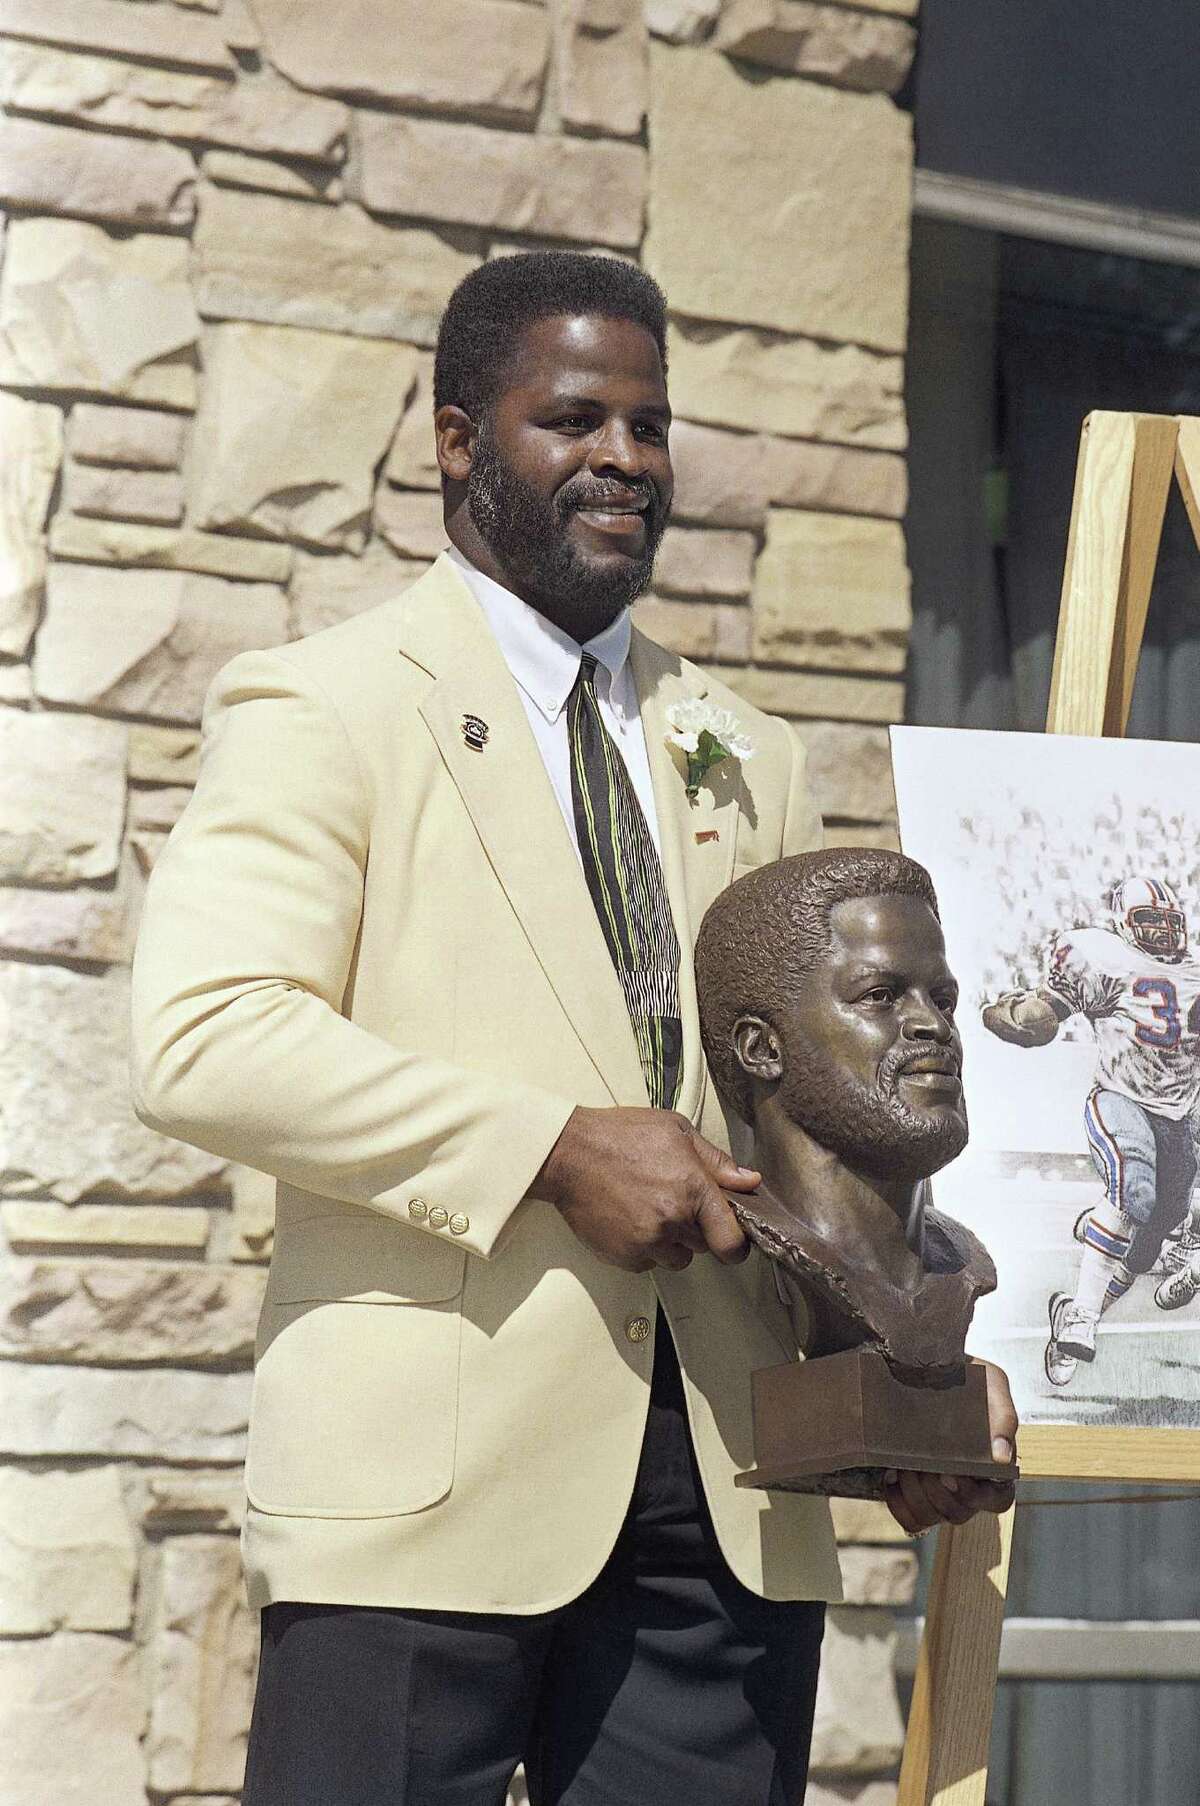 Former Houston Oilers great Earl Campbell poses with his bronzes bust after his enshrinment in the Pro Football Hall of Fame, Saturday, July 27, 1991 in Canton, Ohio. (AP Photo/Bruce Zake)